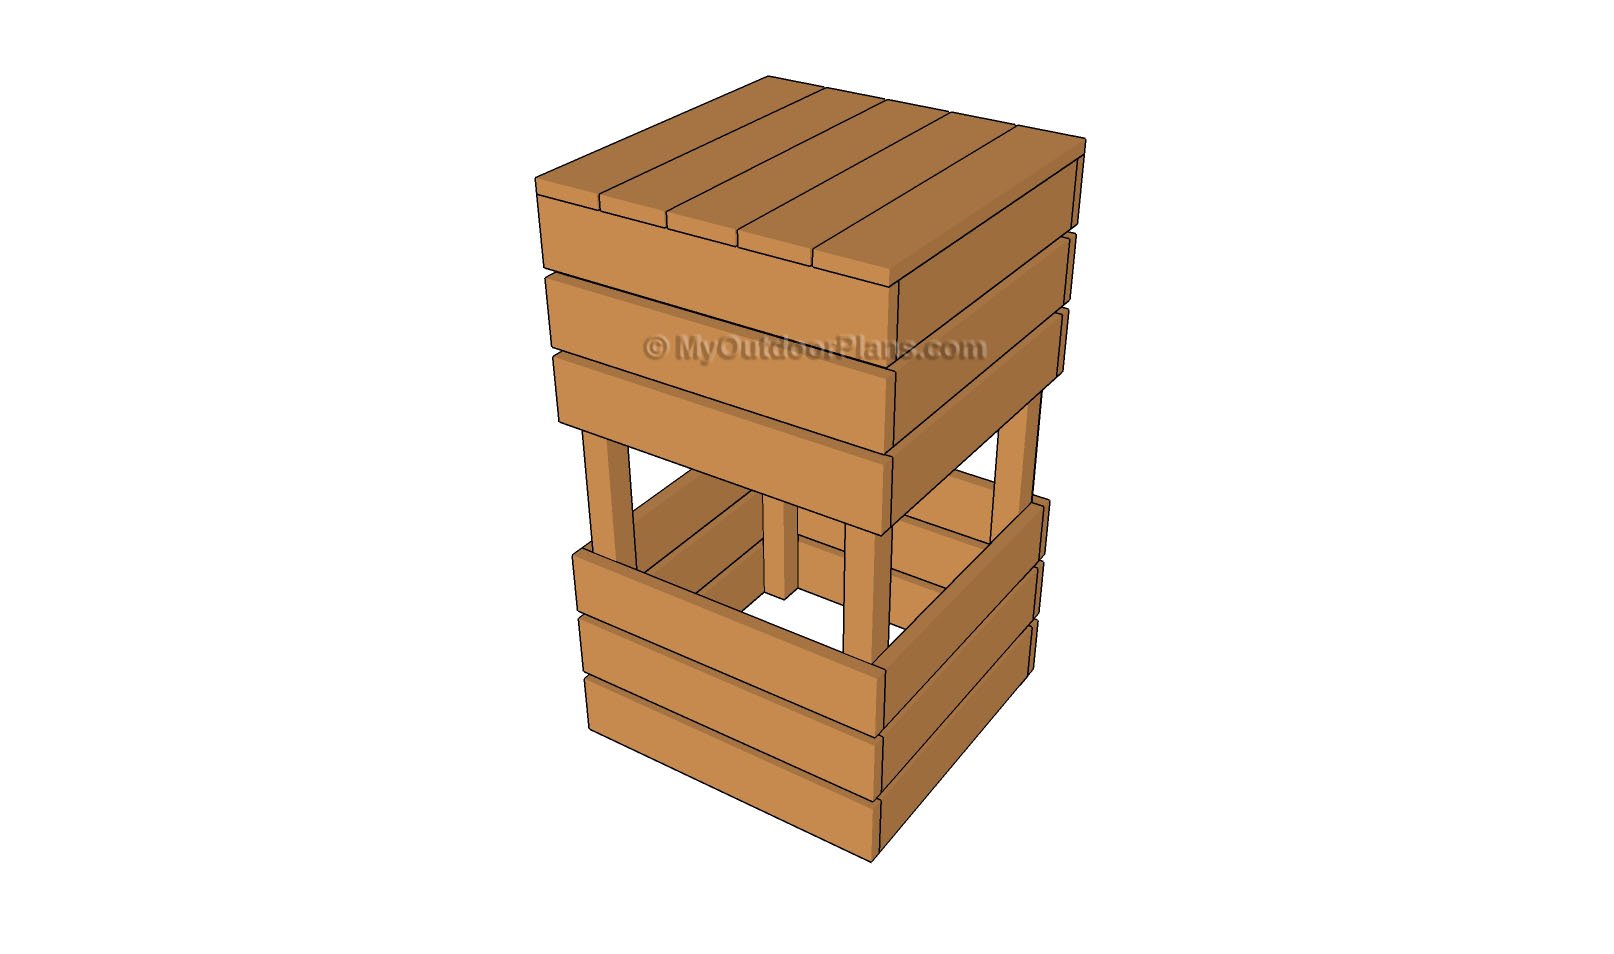 Bar Stool Plans | Free Outdoor Plans - DIY Shed, Wooden Playhouse 